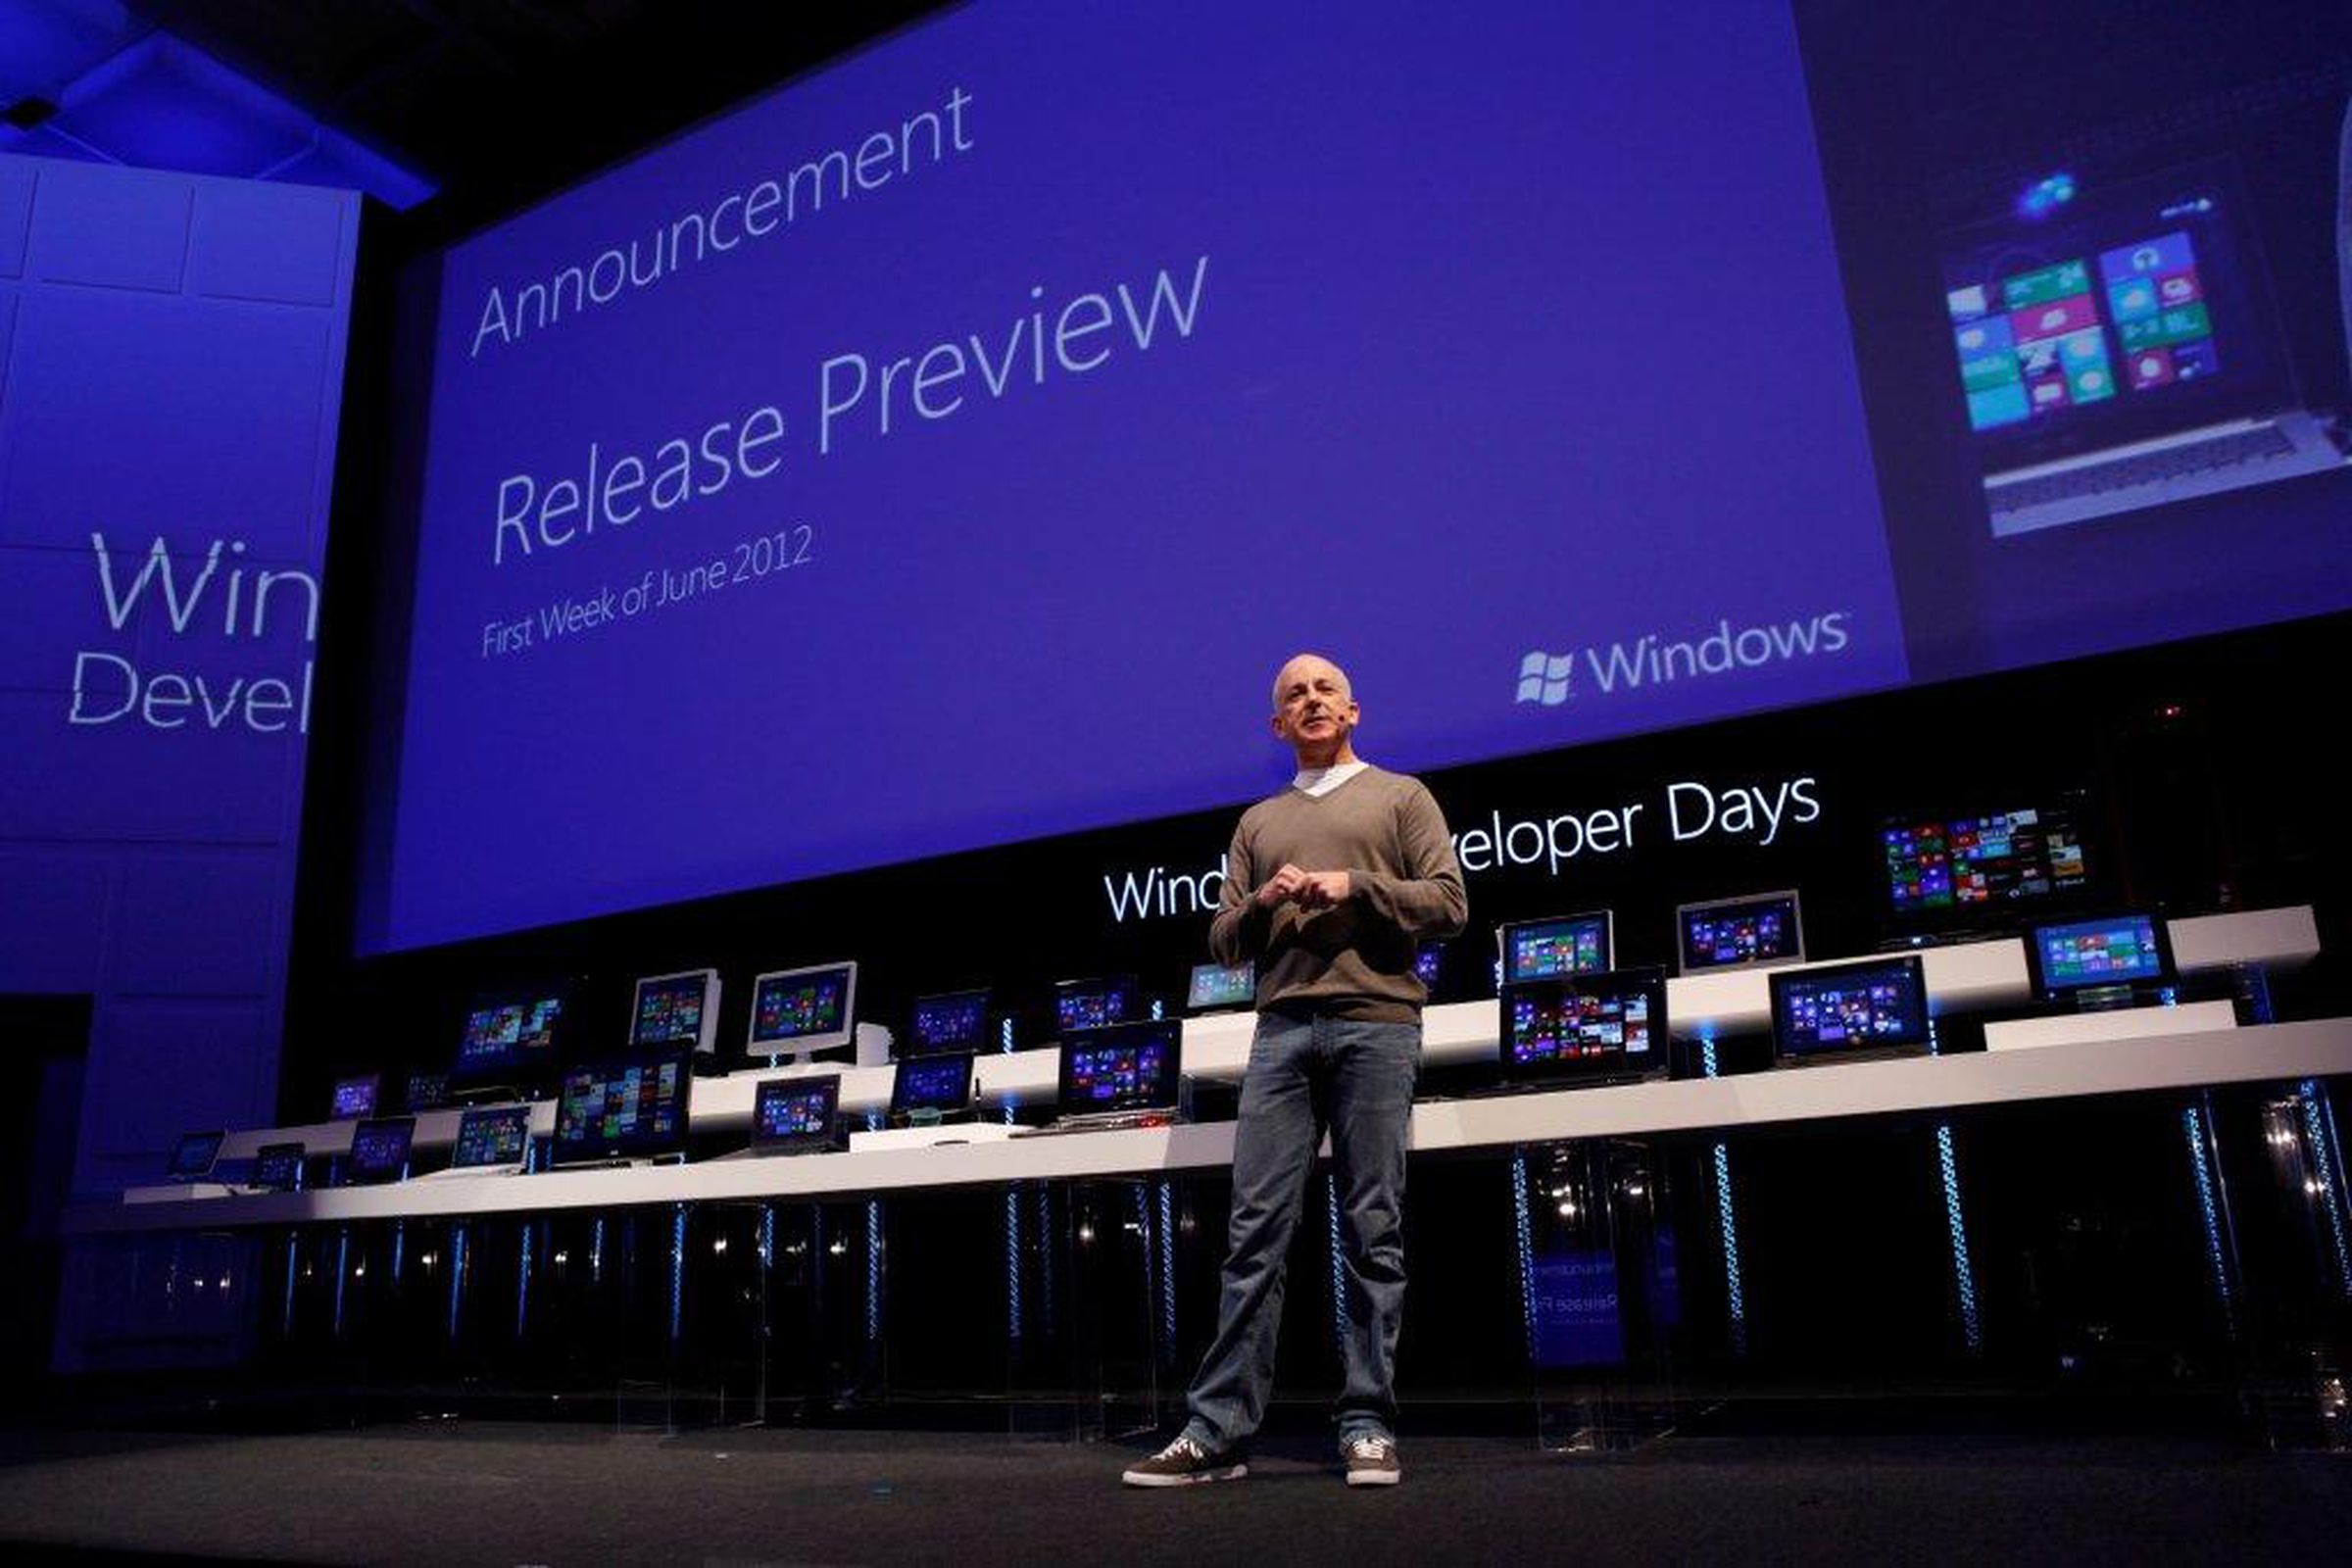 windows 8 release preview